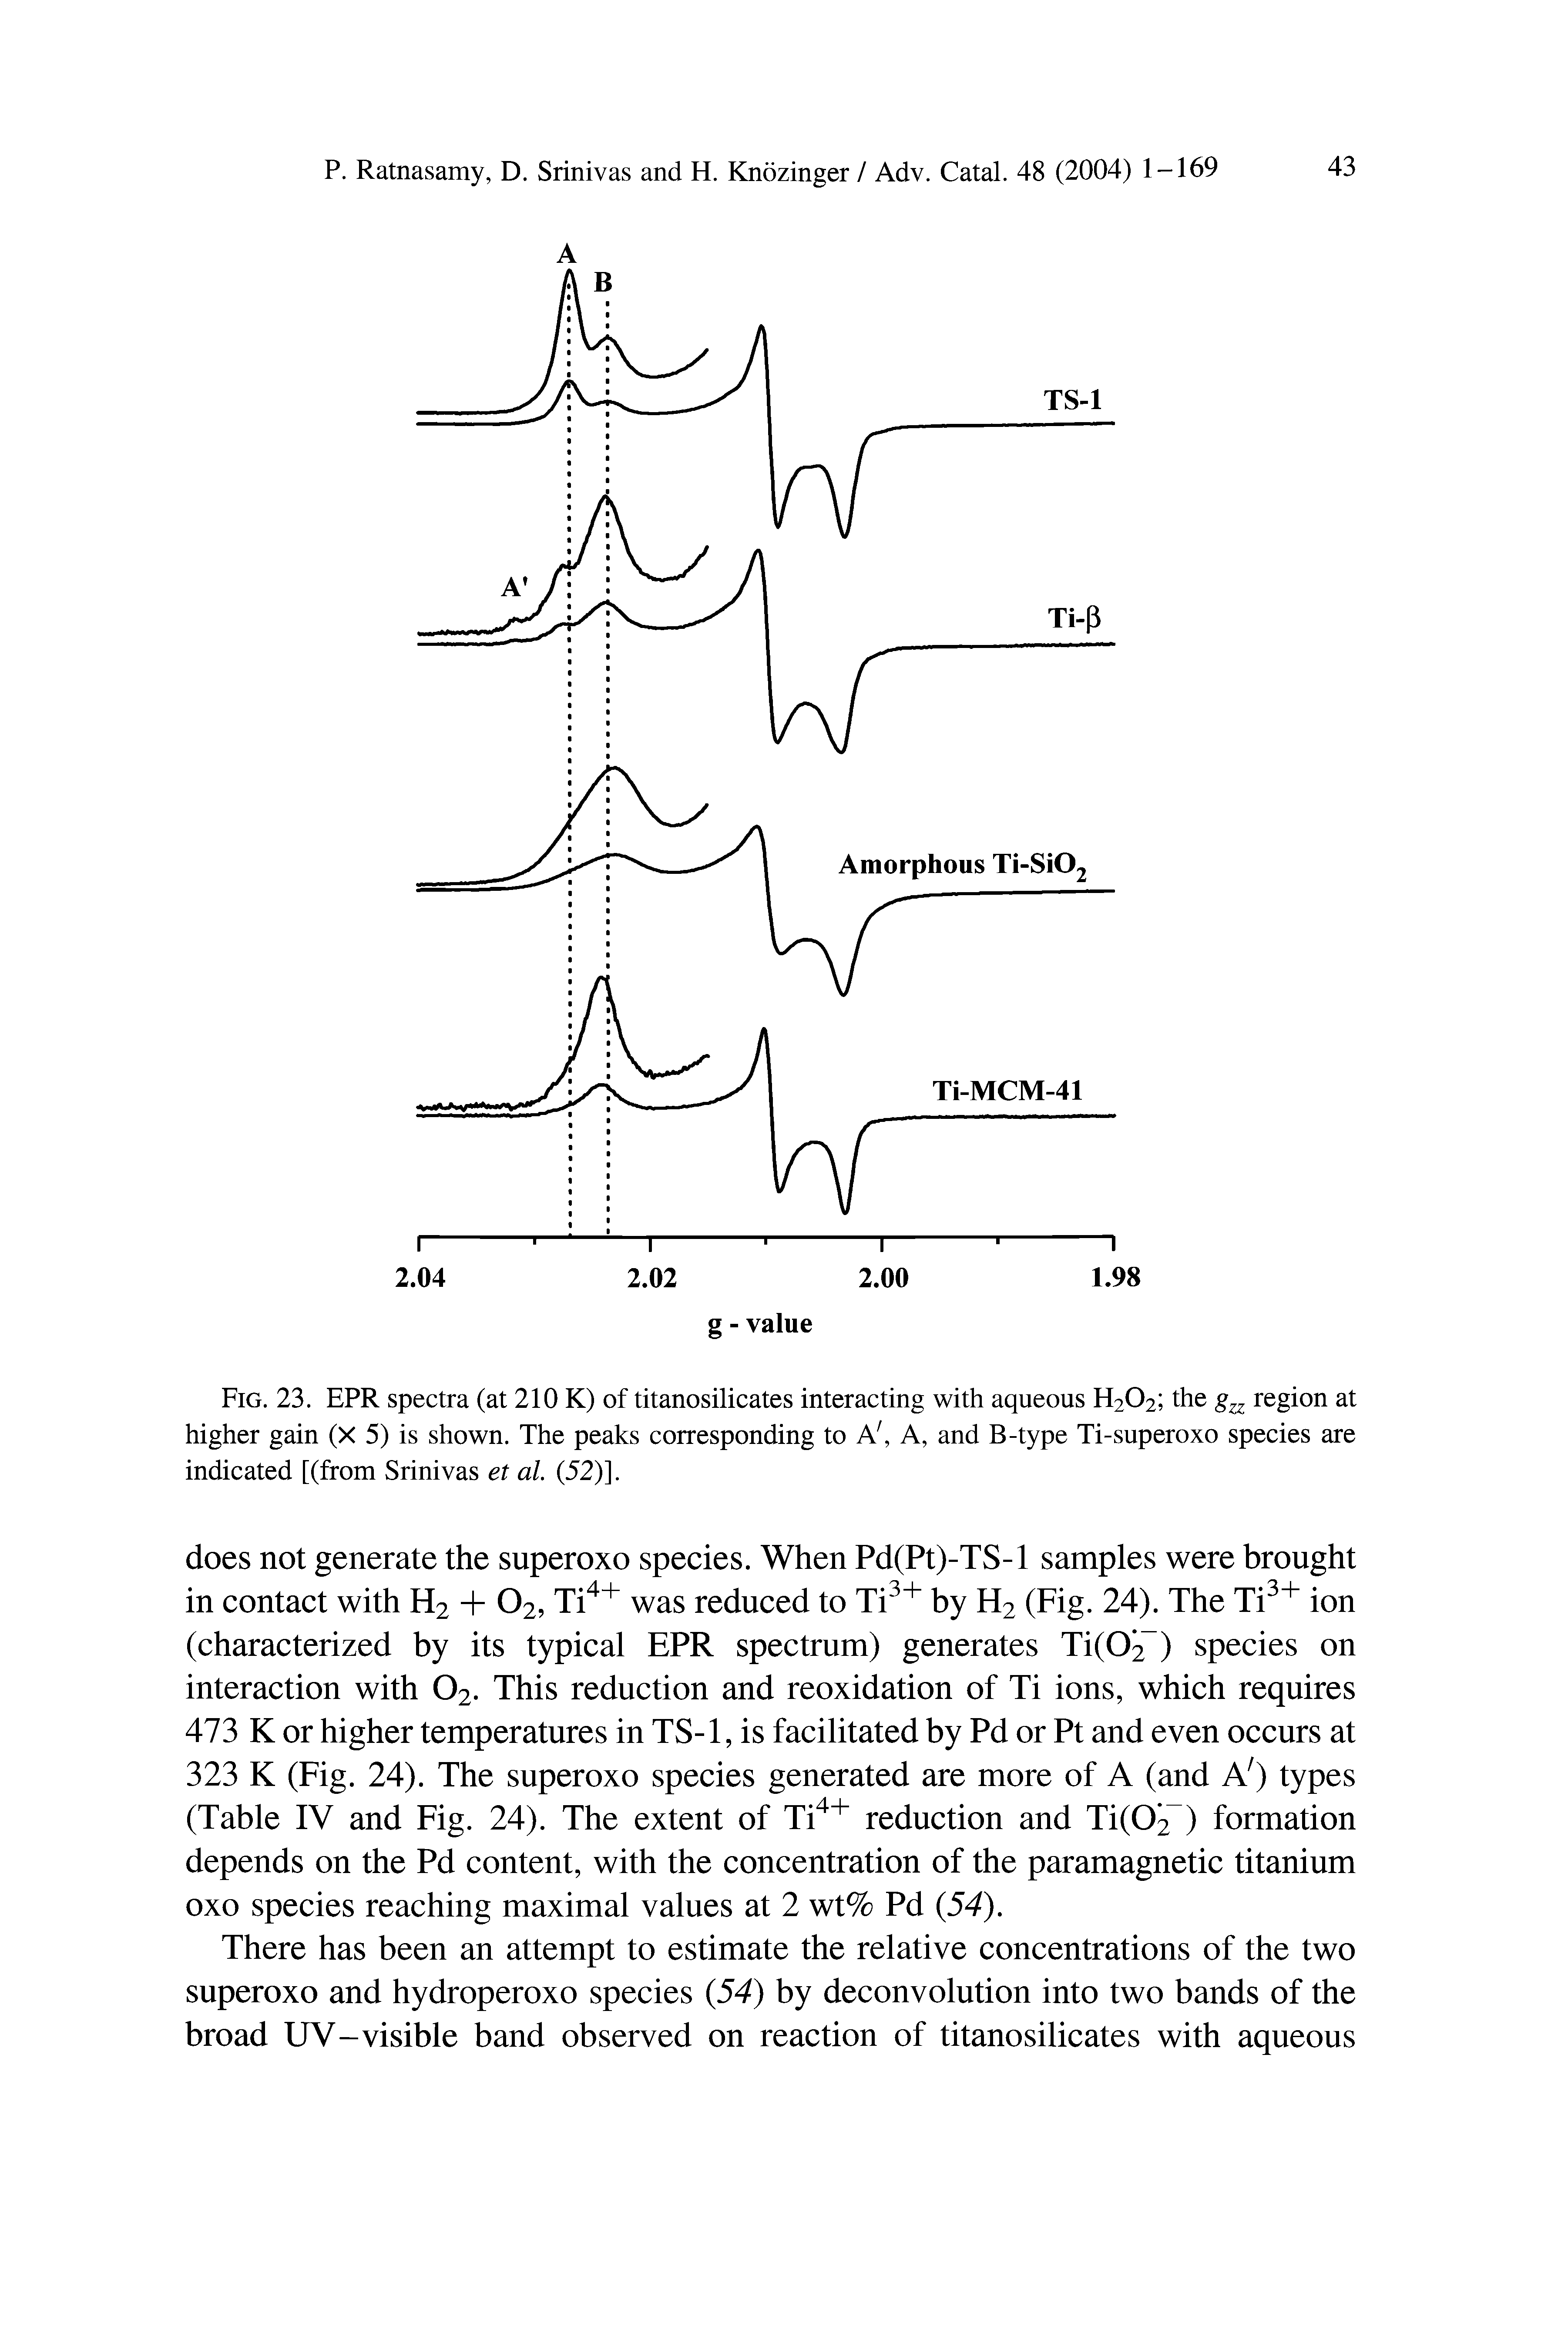 Fig. 23. EPR spectra (at 210 K) of titanosilicates interacting with aqueous H202 the gzz region at higher gain (X 5) is shown. The peaks corresponding to Af, A, and B-type Ti-superoxo species are indicated [(from Srinivas et al. (52)].